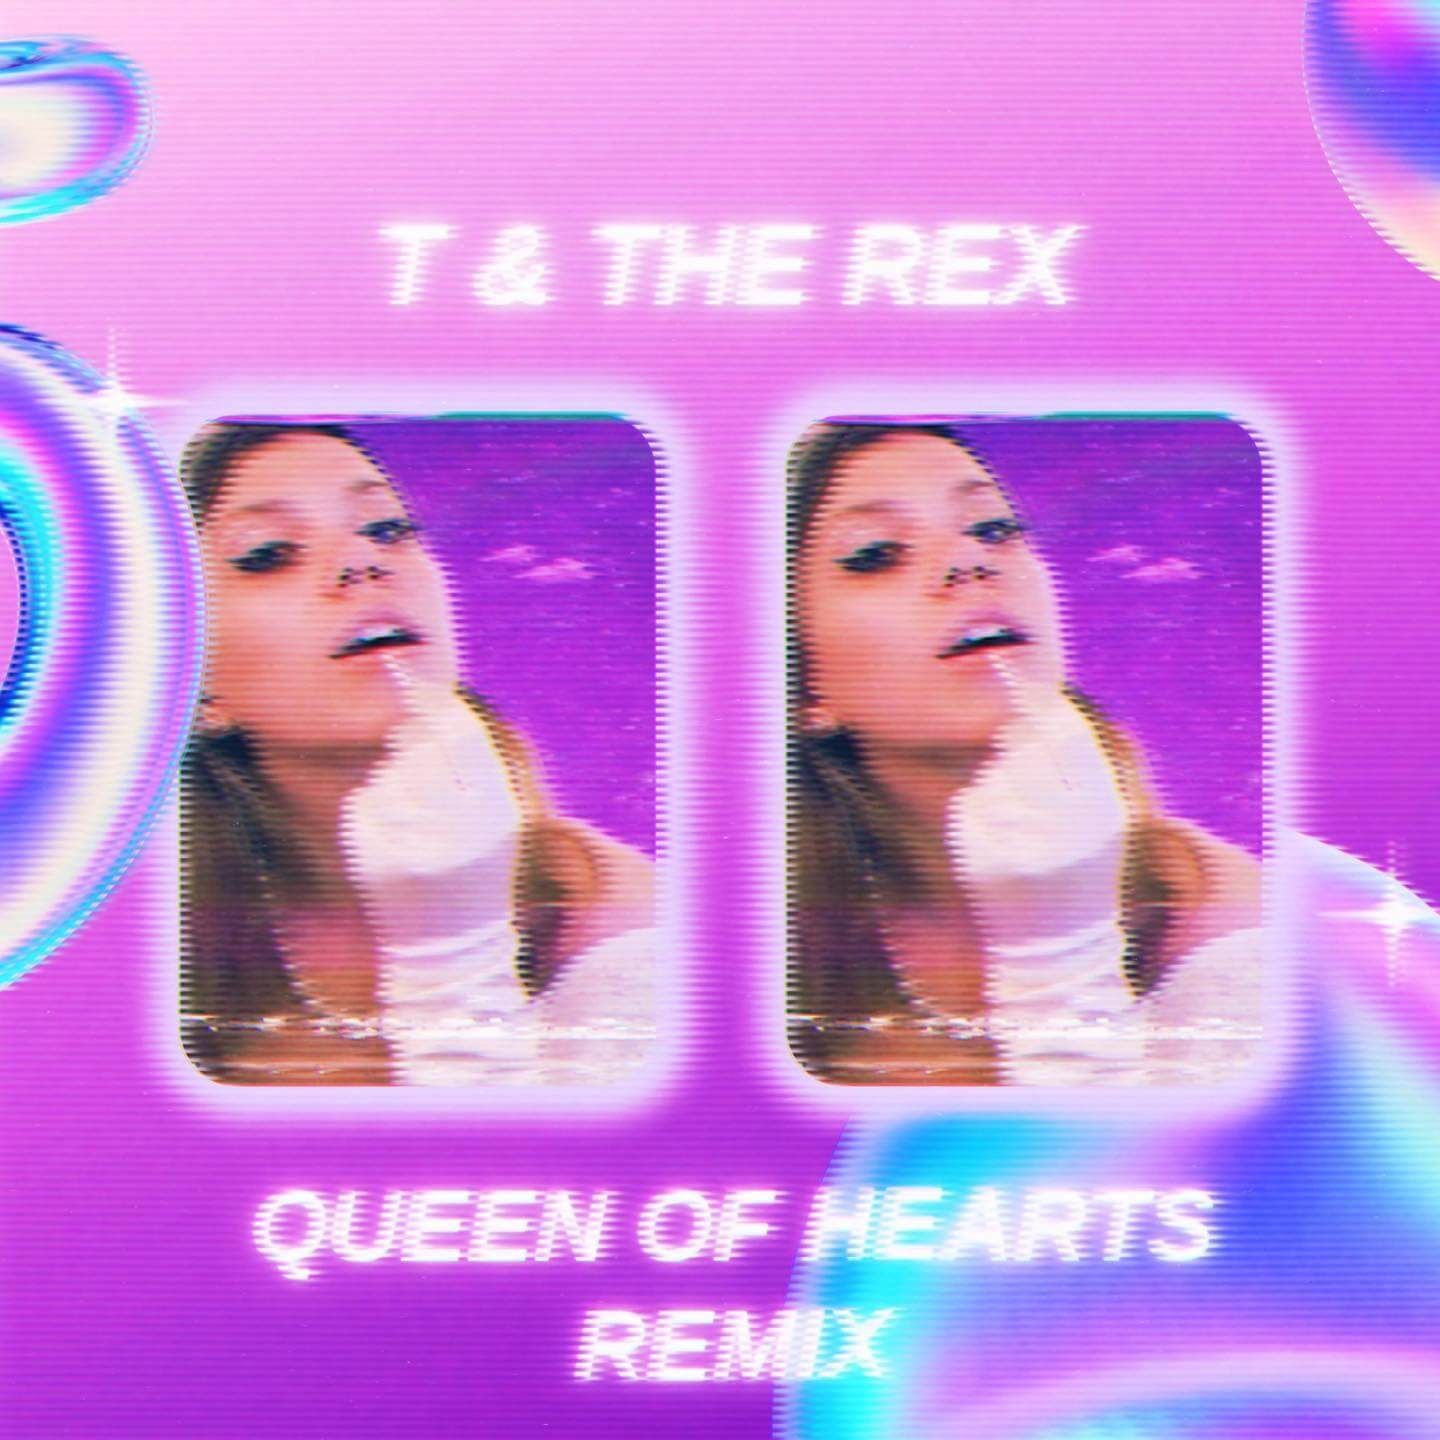 T & the Rex queen of hearts remix photo cover